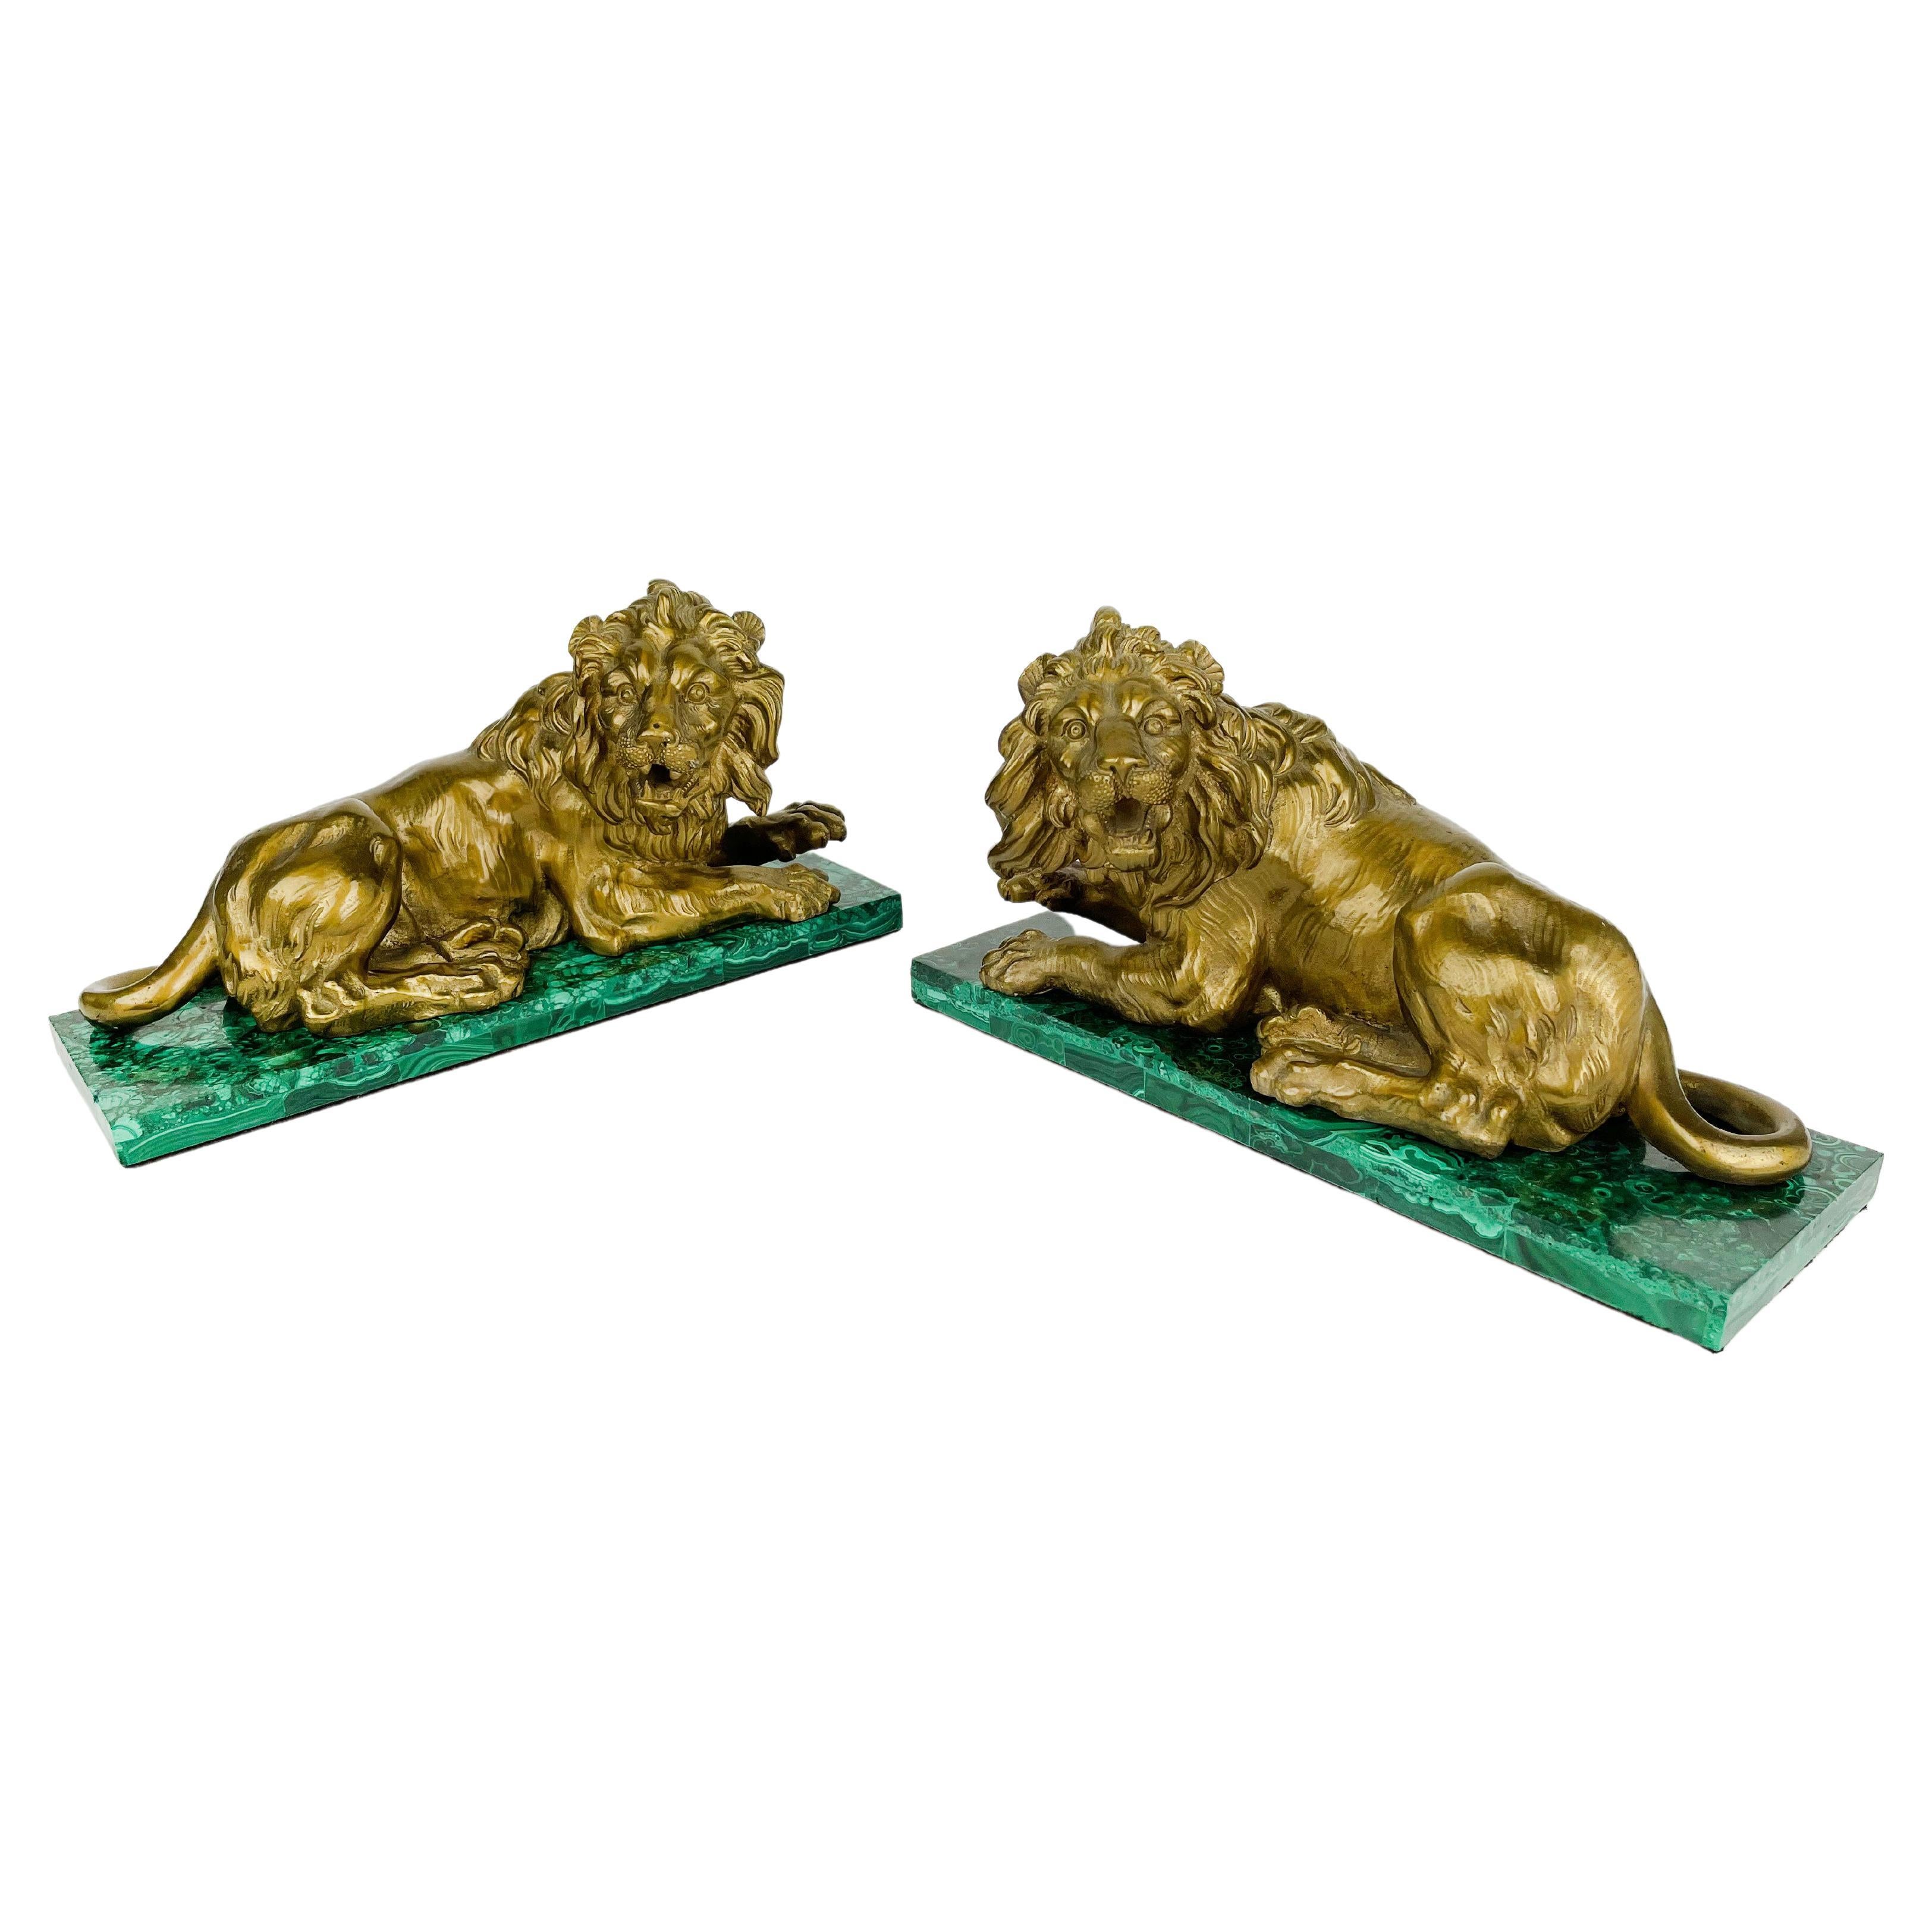 Pair of Gilt Bronze &Malachite Figures of Lions, France, circa 1850 For Sale